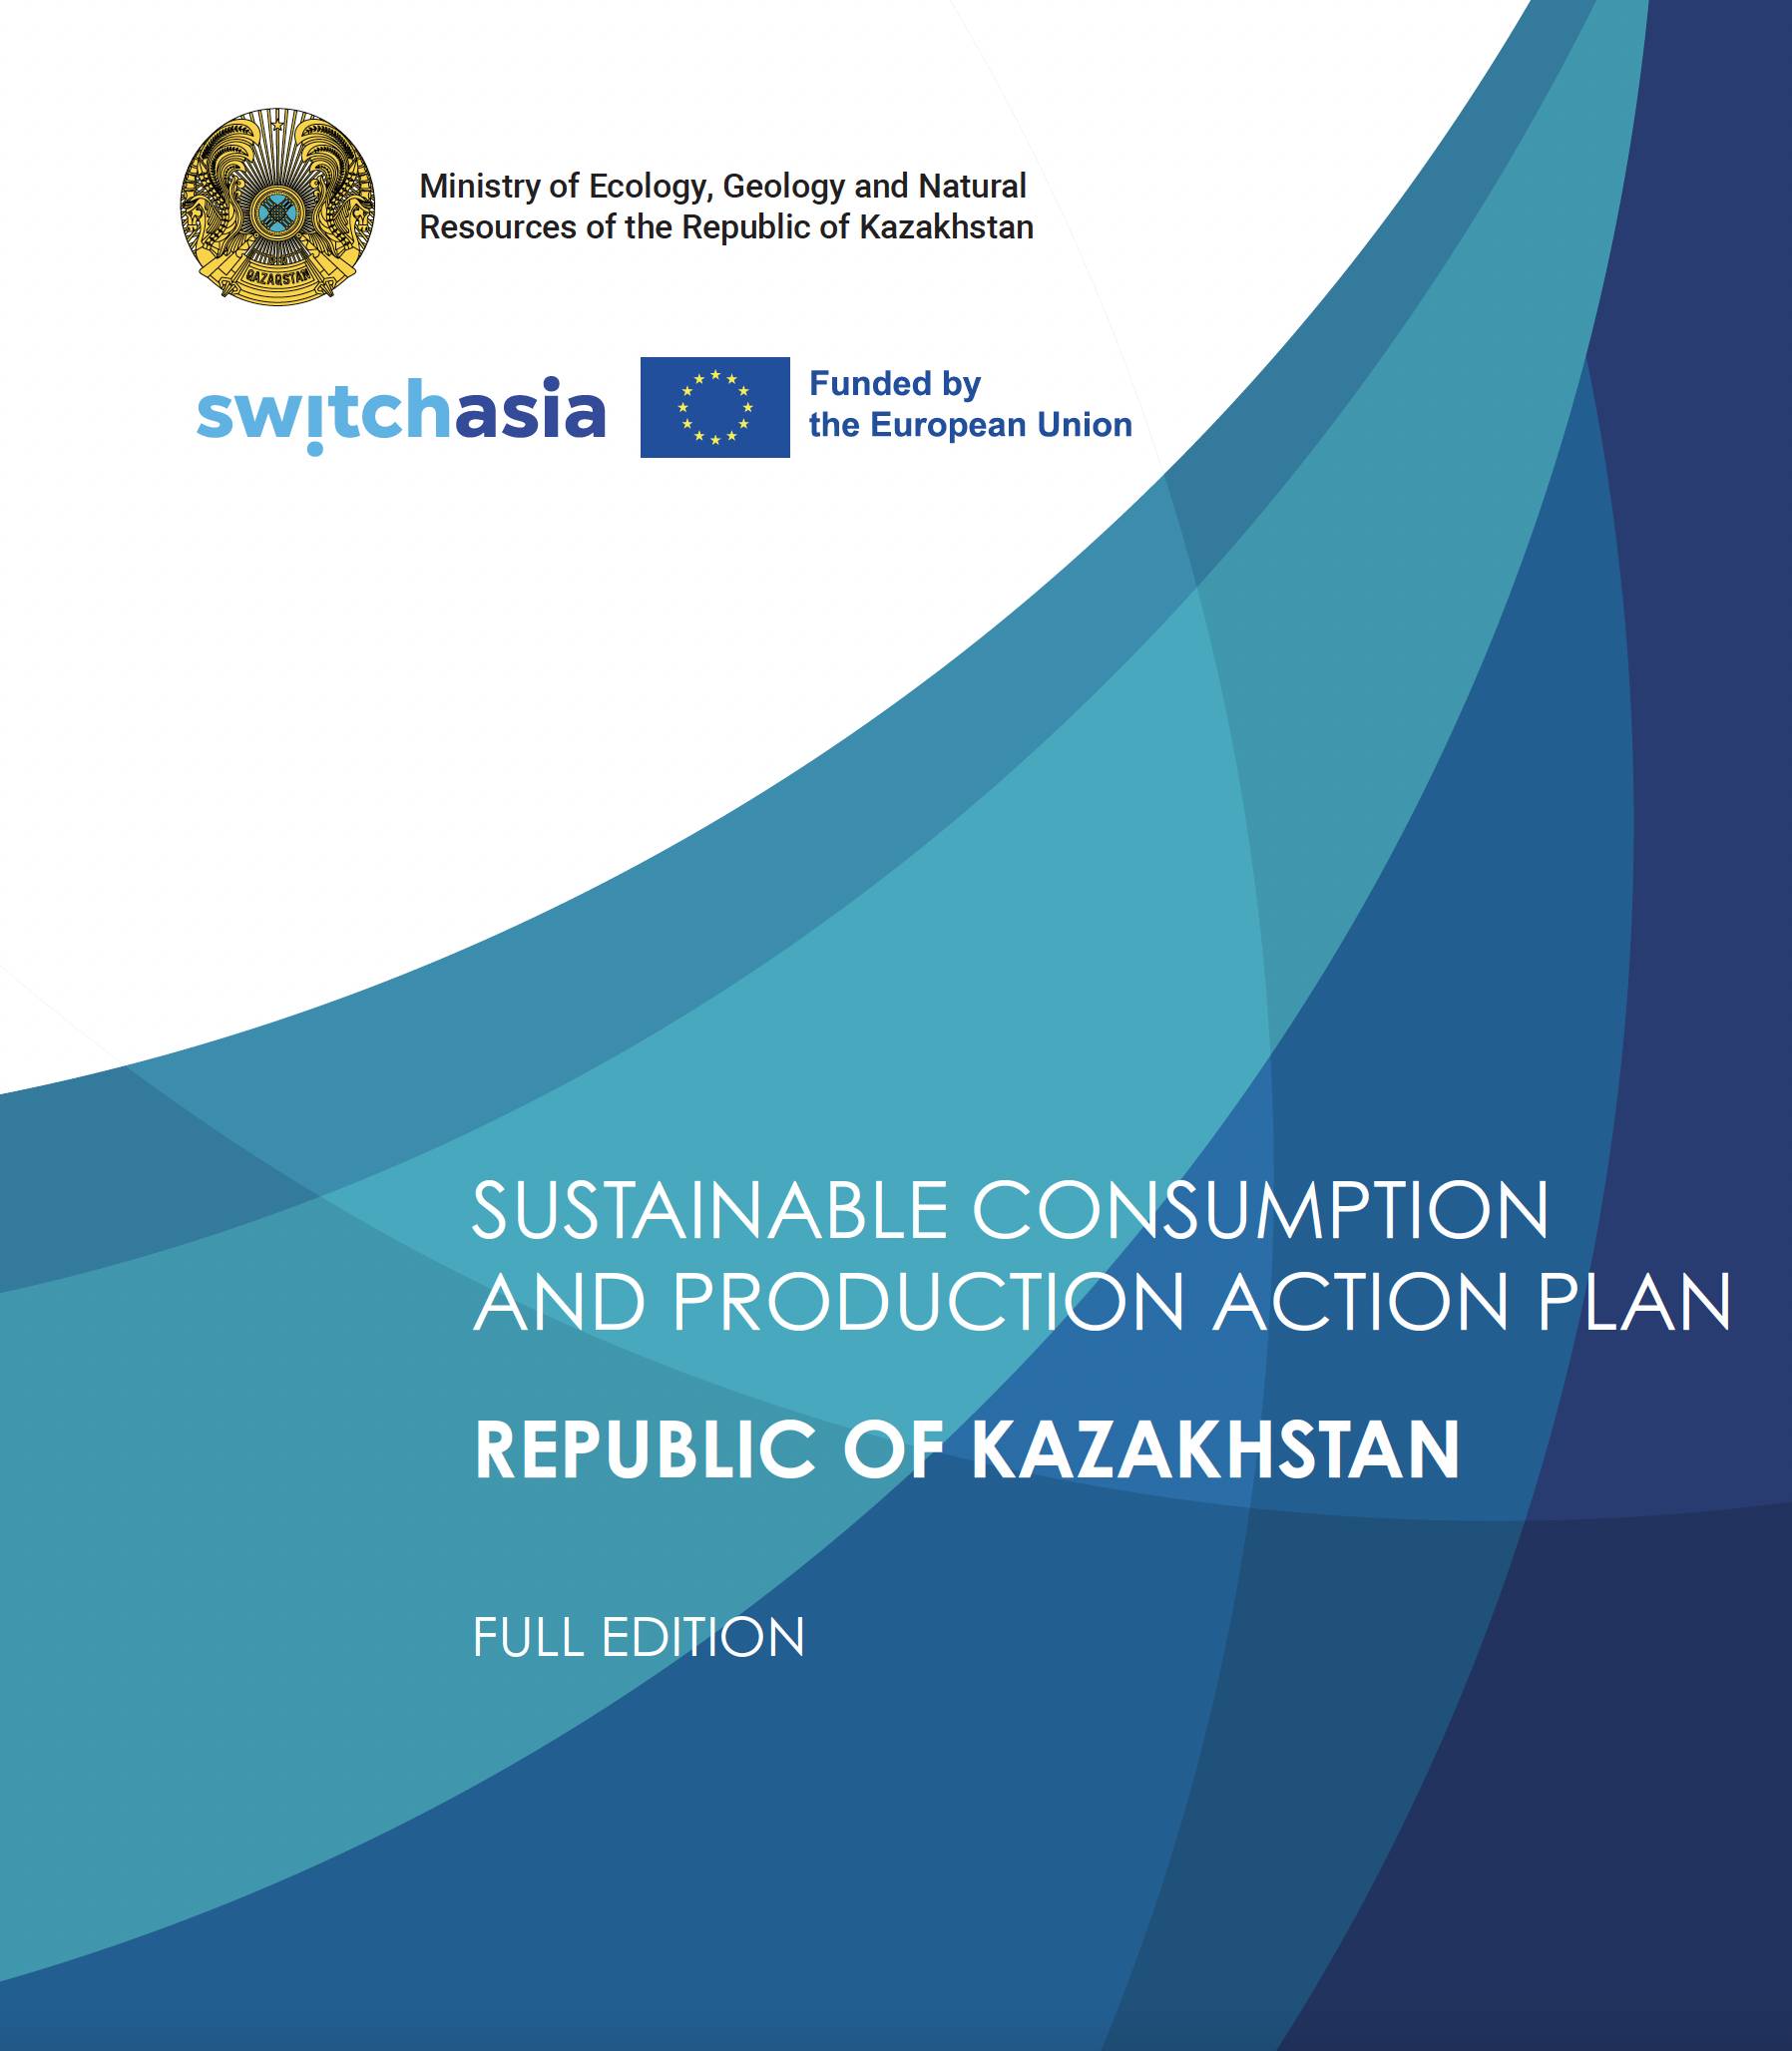 Sustainable Consumption and Production Action Plan for the Republic of Kazakhstan